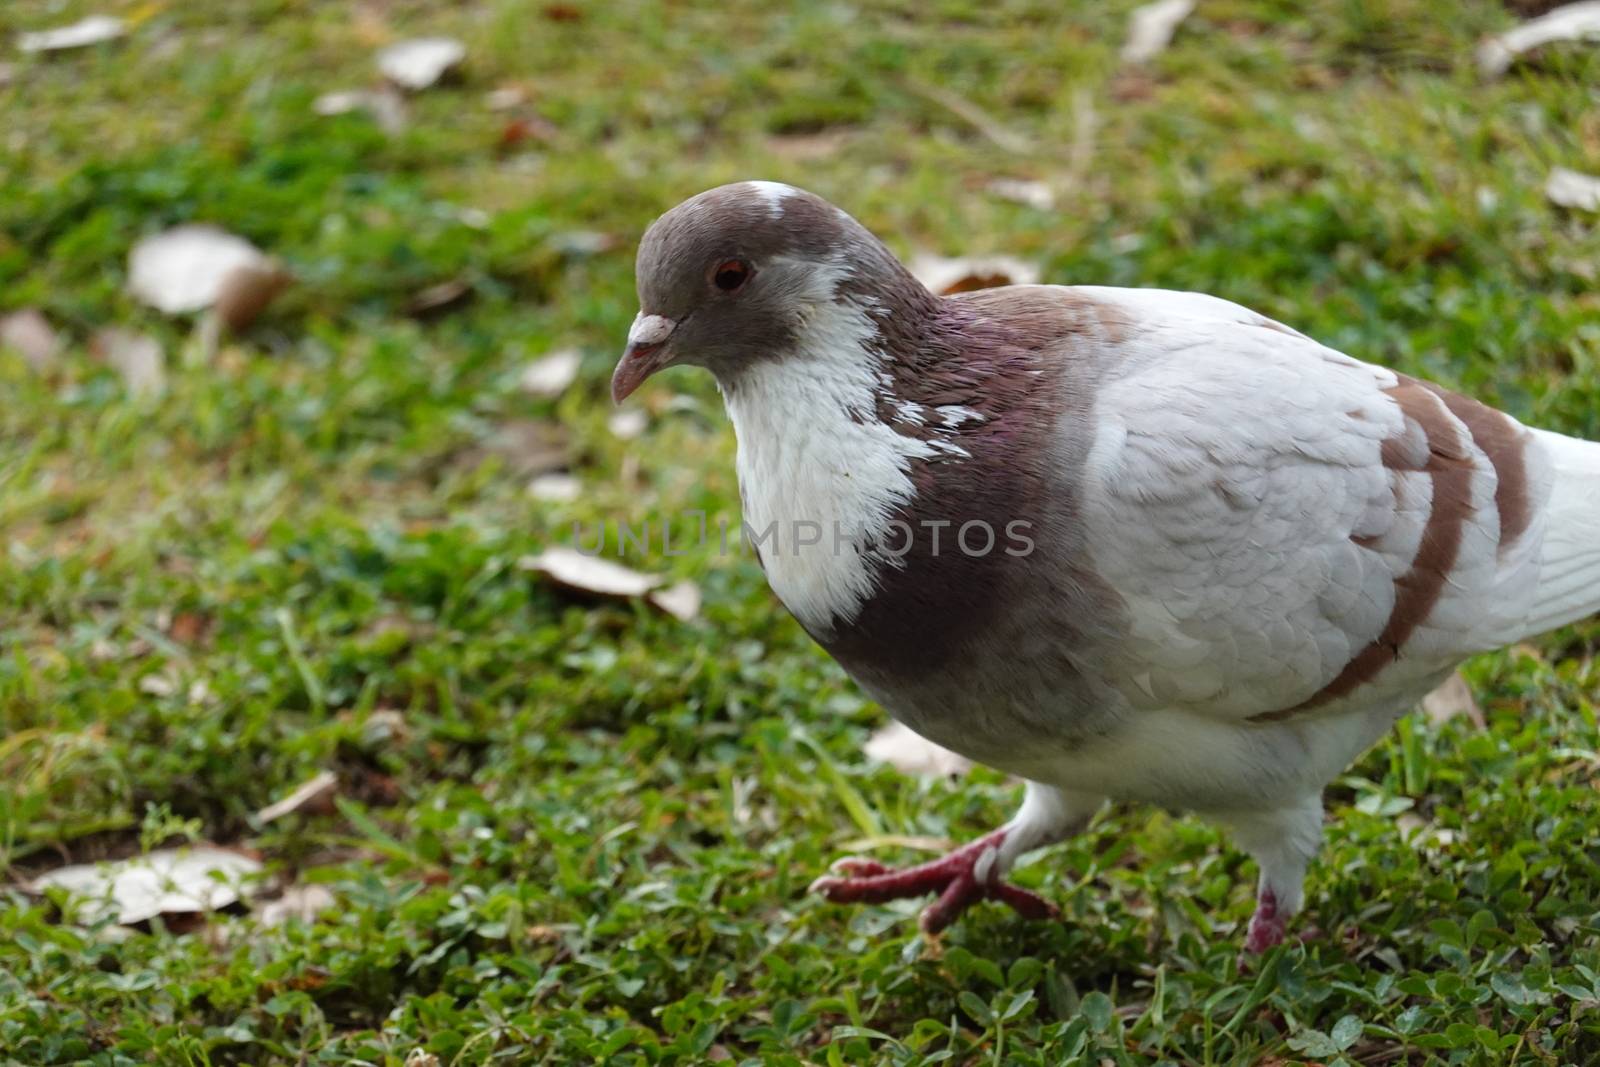 A brown and white bird standing in the grass. High quality photo